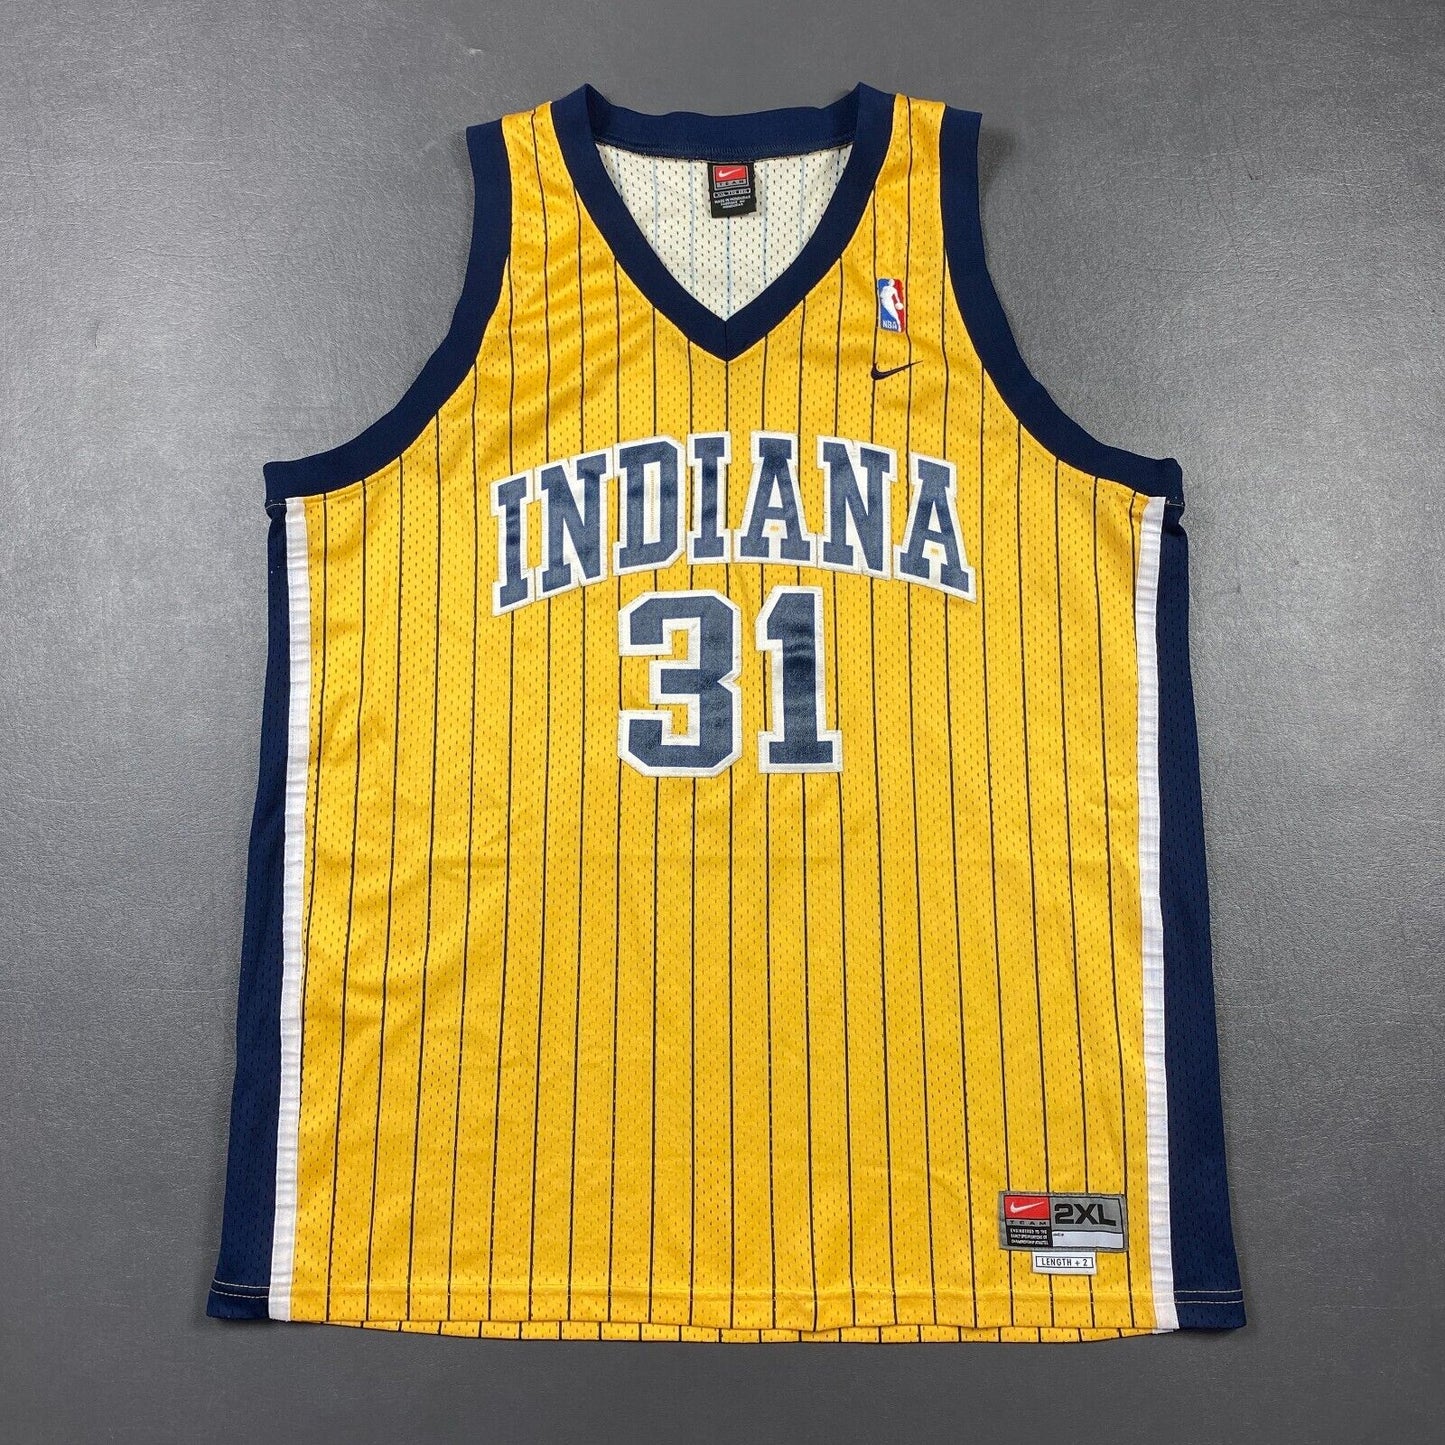 100% Authentic Reggie Miller Vintage Nike Indiana Pacers Jersey Size 2XL Mens